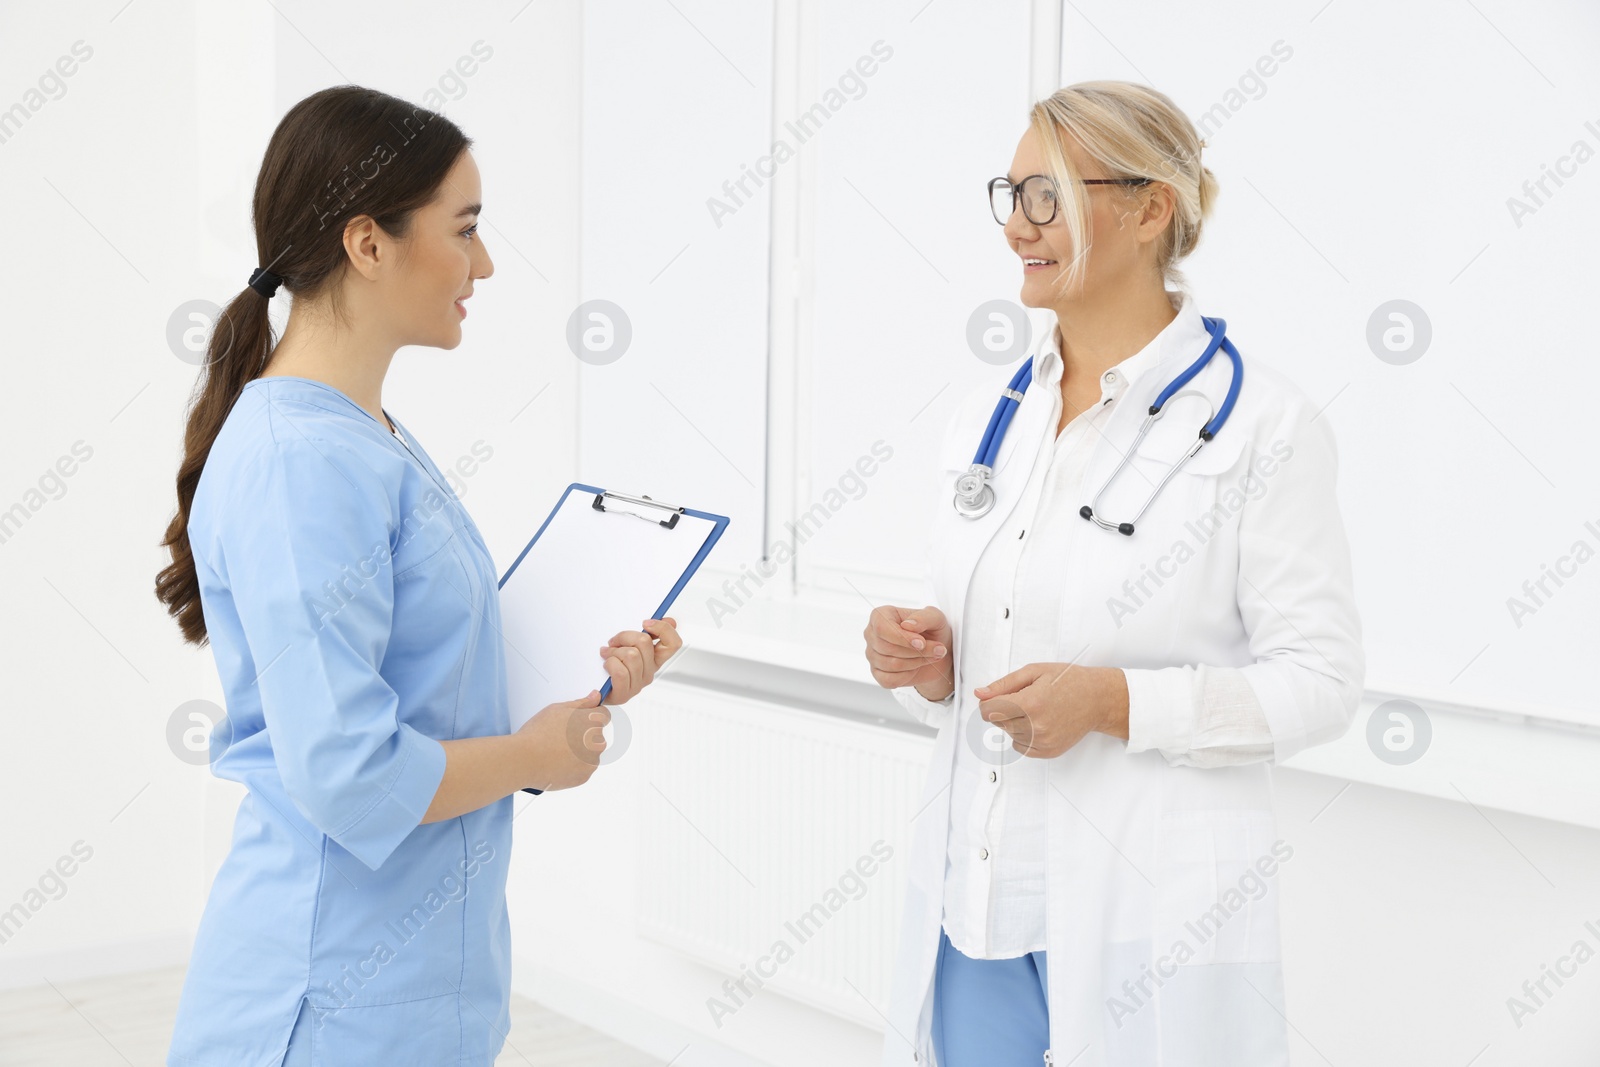 Photo of Medical doctors in uniforms having discussion indoors